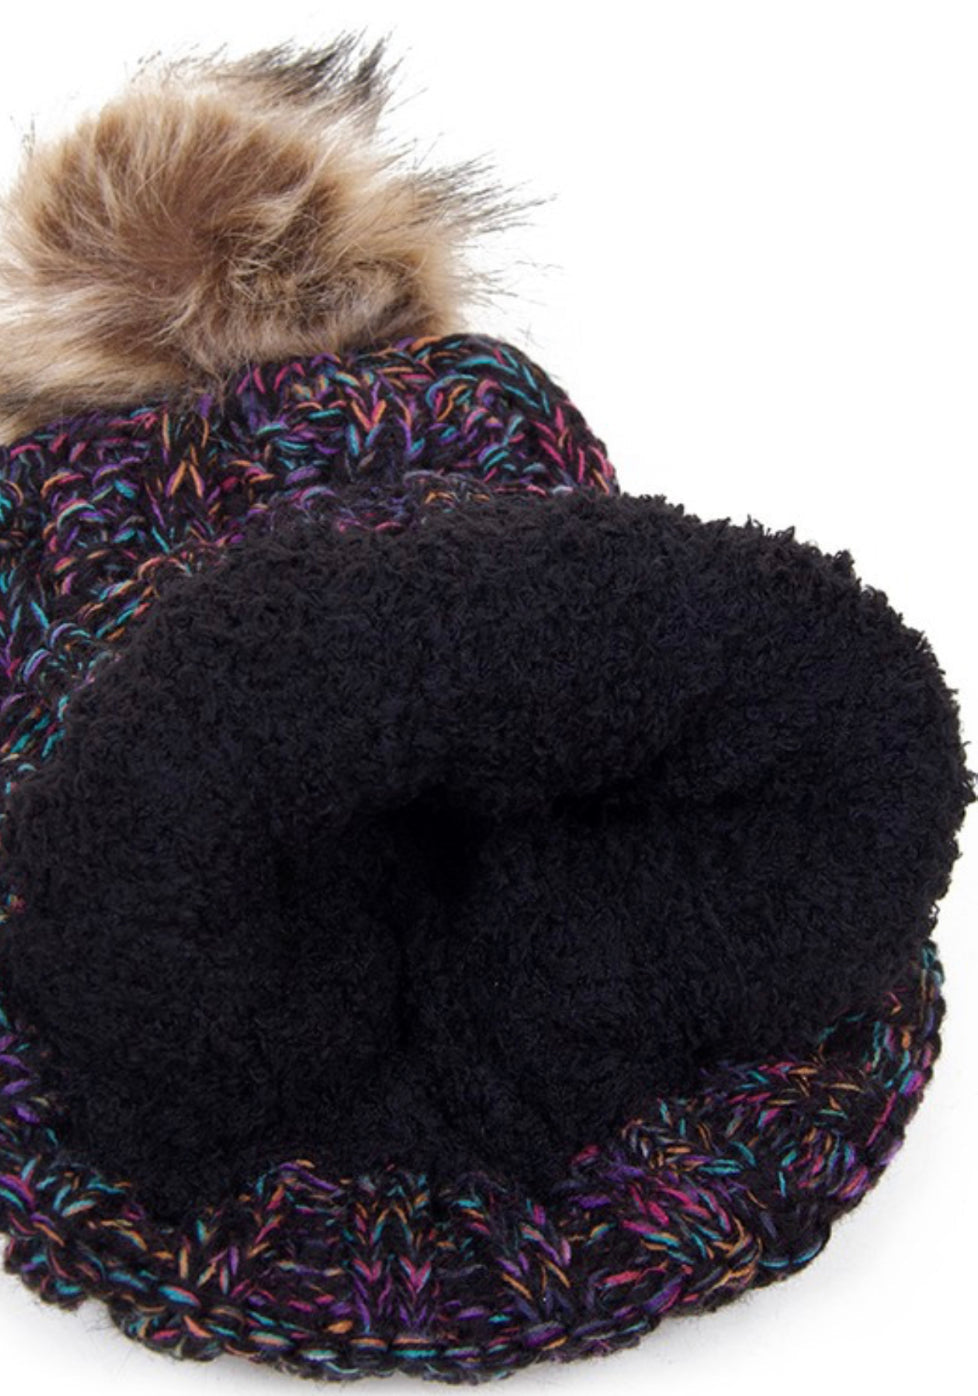 CC pom hat with warm, soft lining, best seller